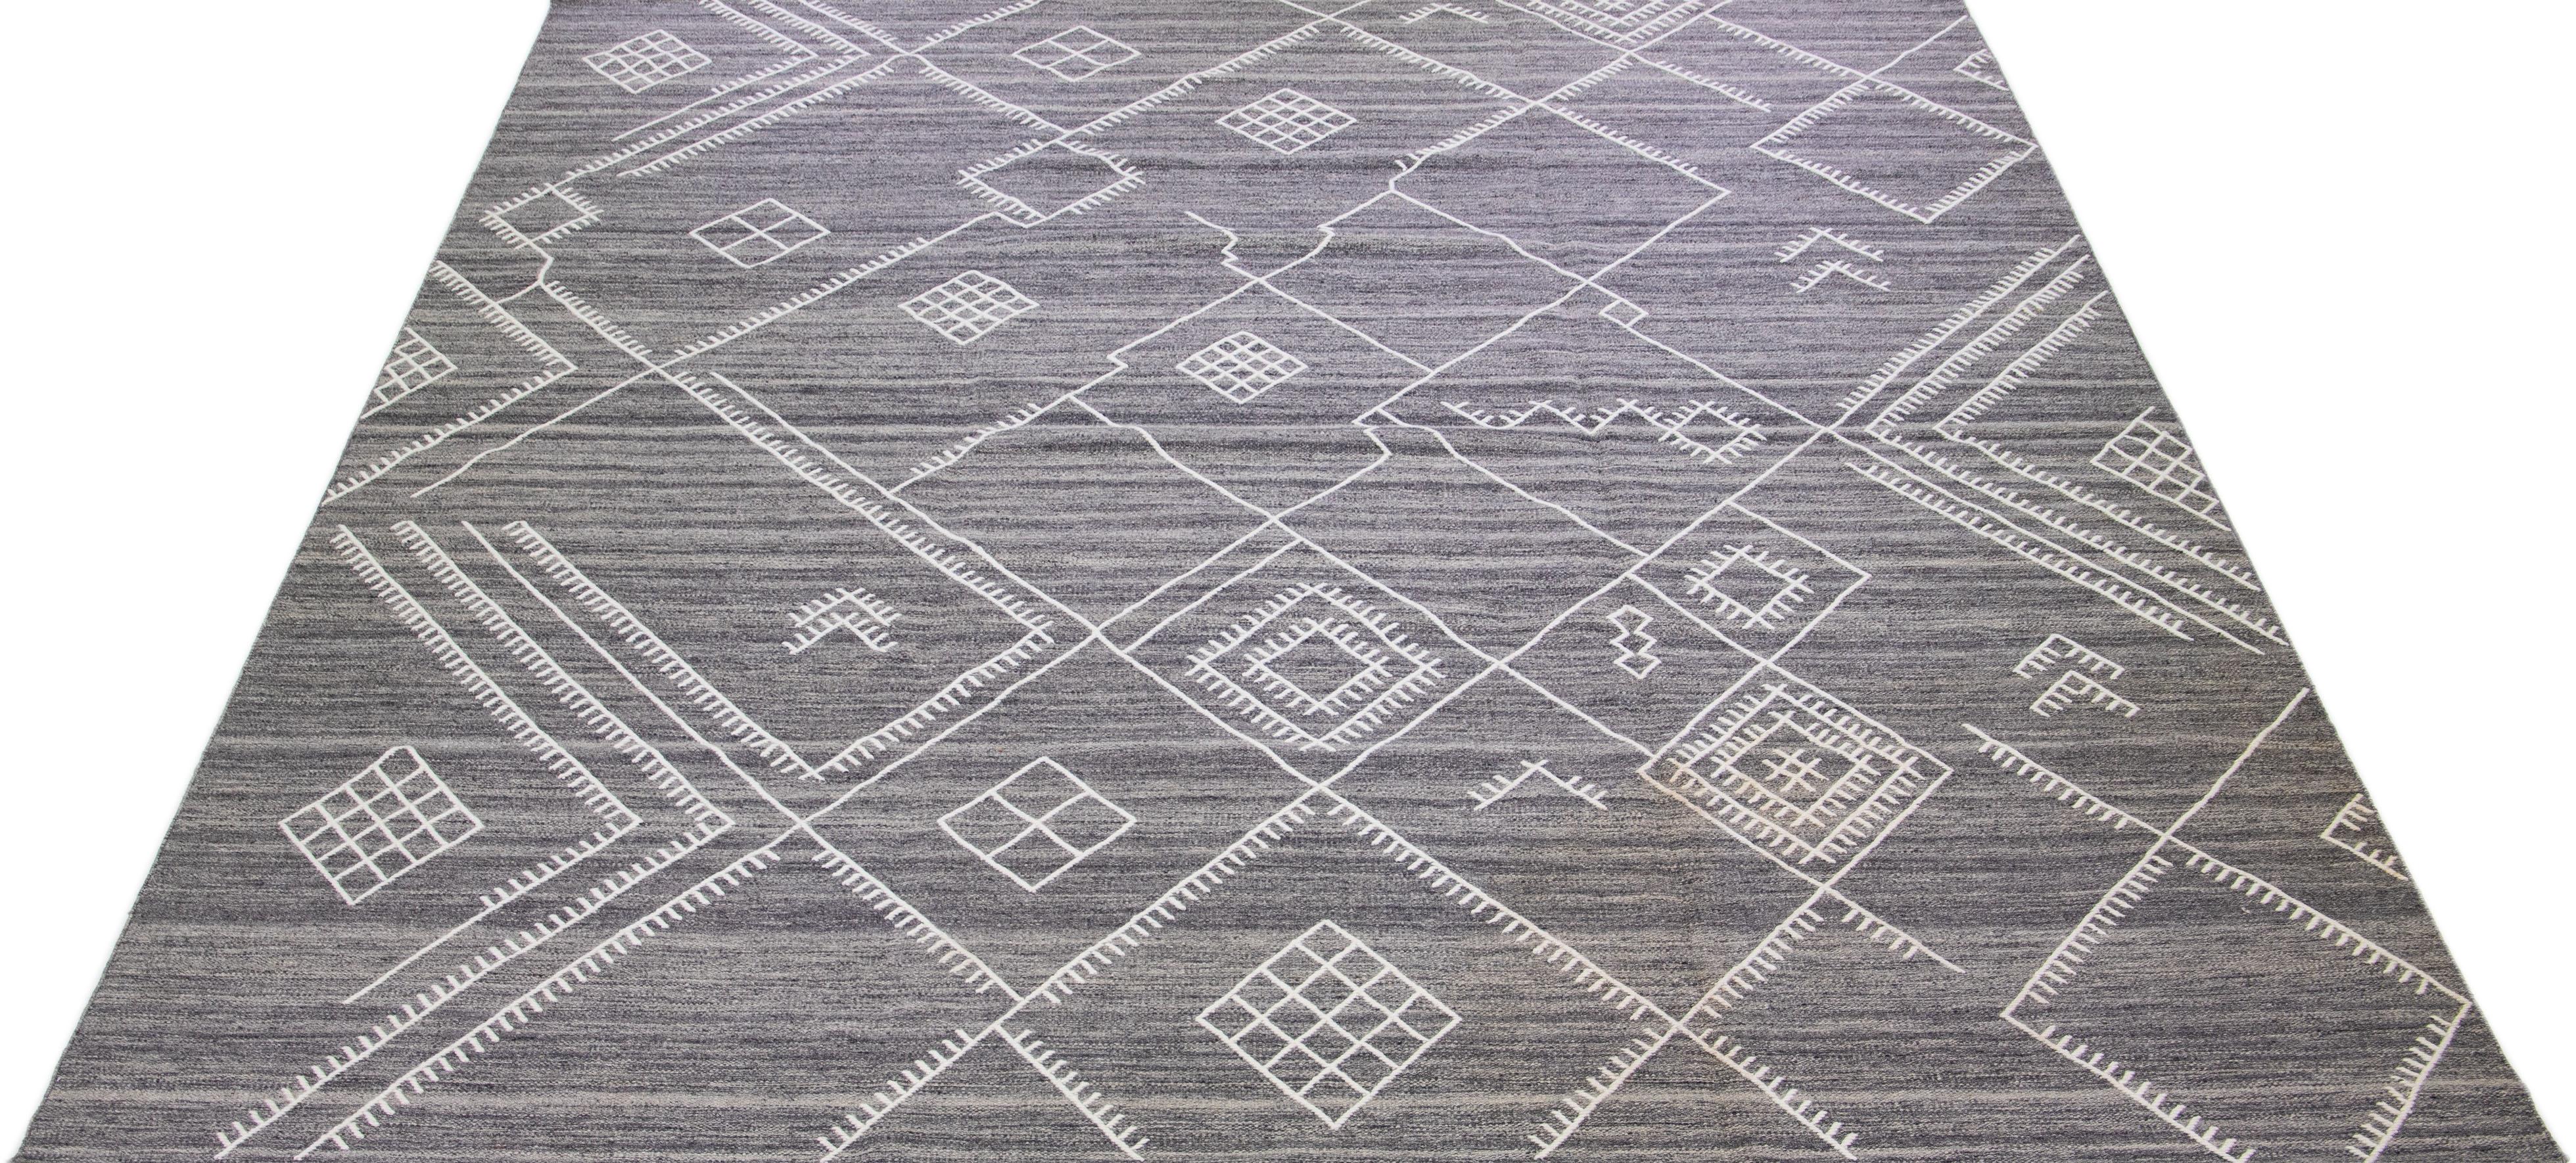 Beautiful kilim handmade wool rug with a gray field. This custom modern flatweave rug of our Nantucket collection has white accents and a gorgeous, all-over geometric coastal design.

This rug measures: 12'7